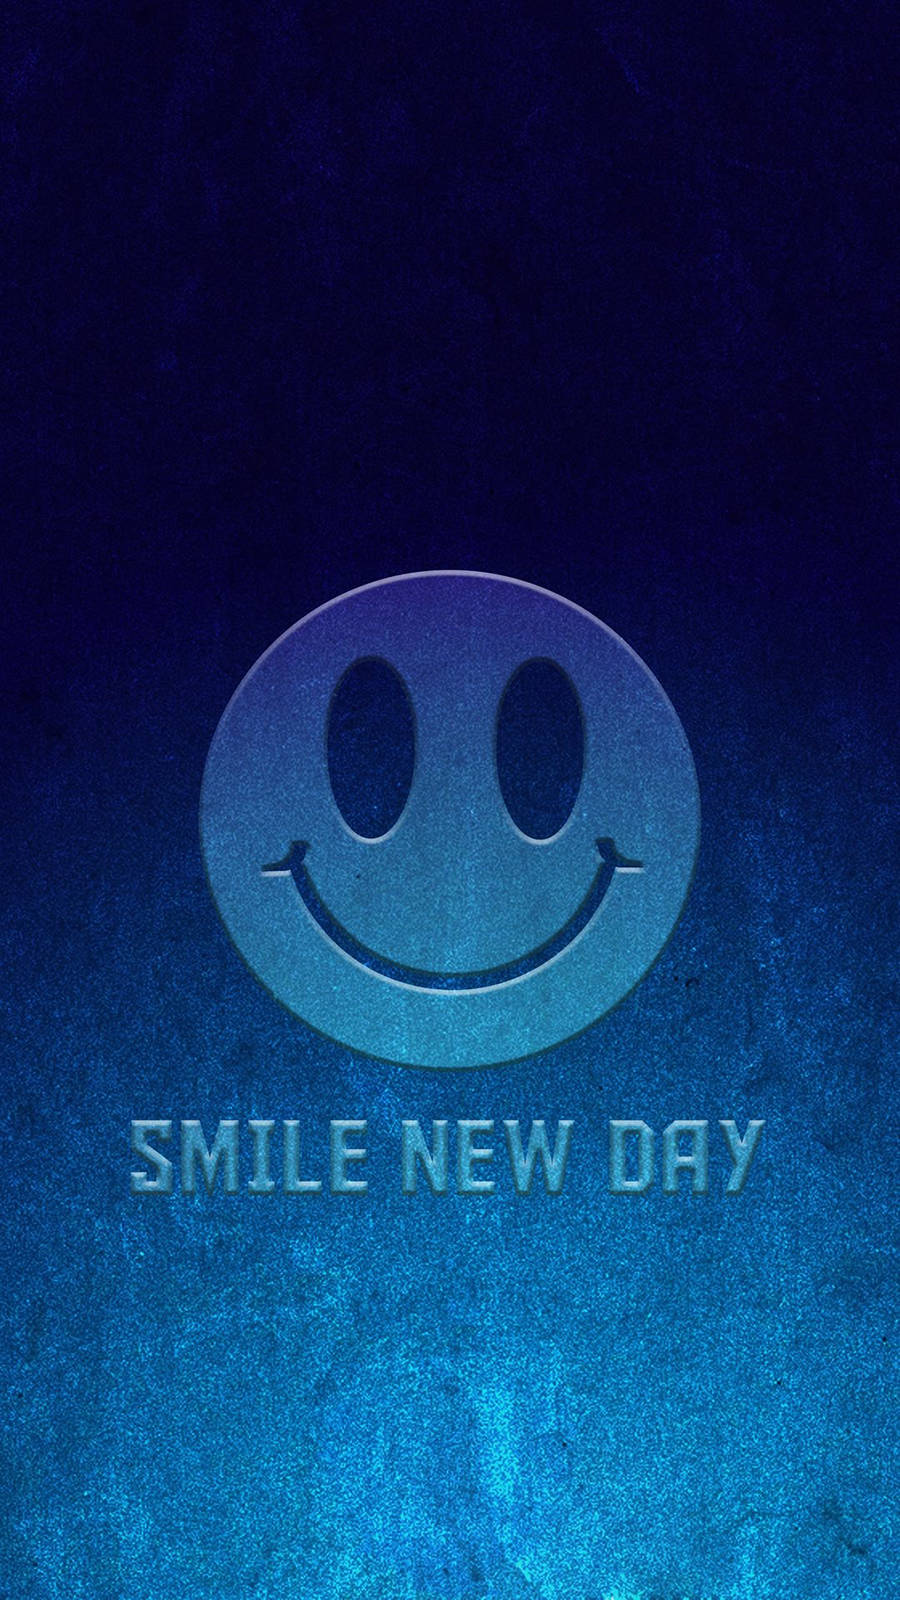 Smile New Day Smiley Face Wallpaper